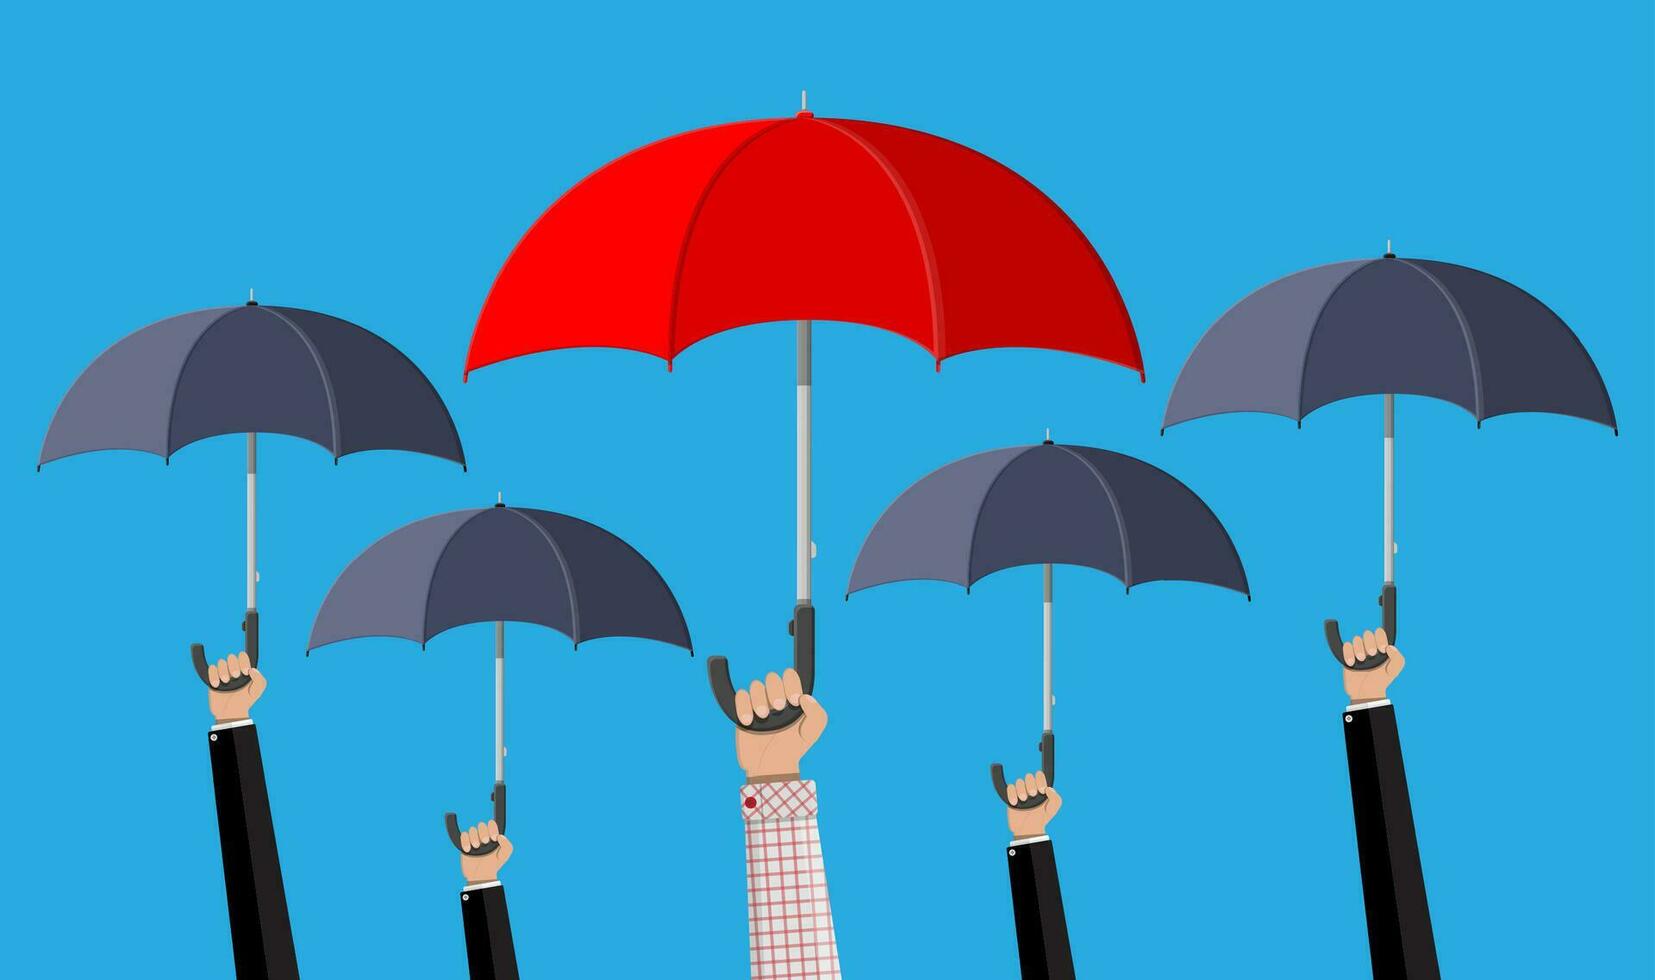 Man with red umbrella in the crowd with grey umbrellas. Human diversity, uniqueness and individuality. Concept of difference. Vector illustration in flat style